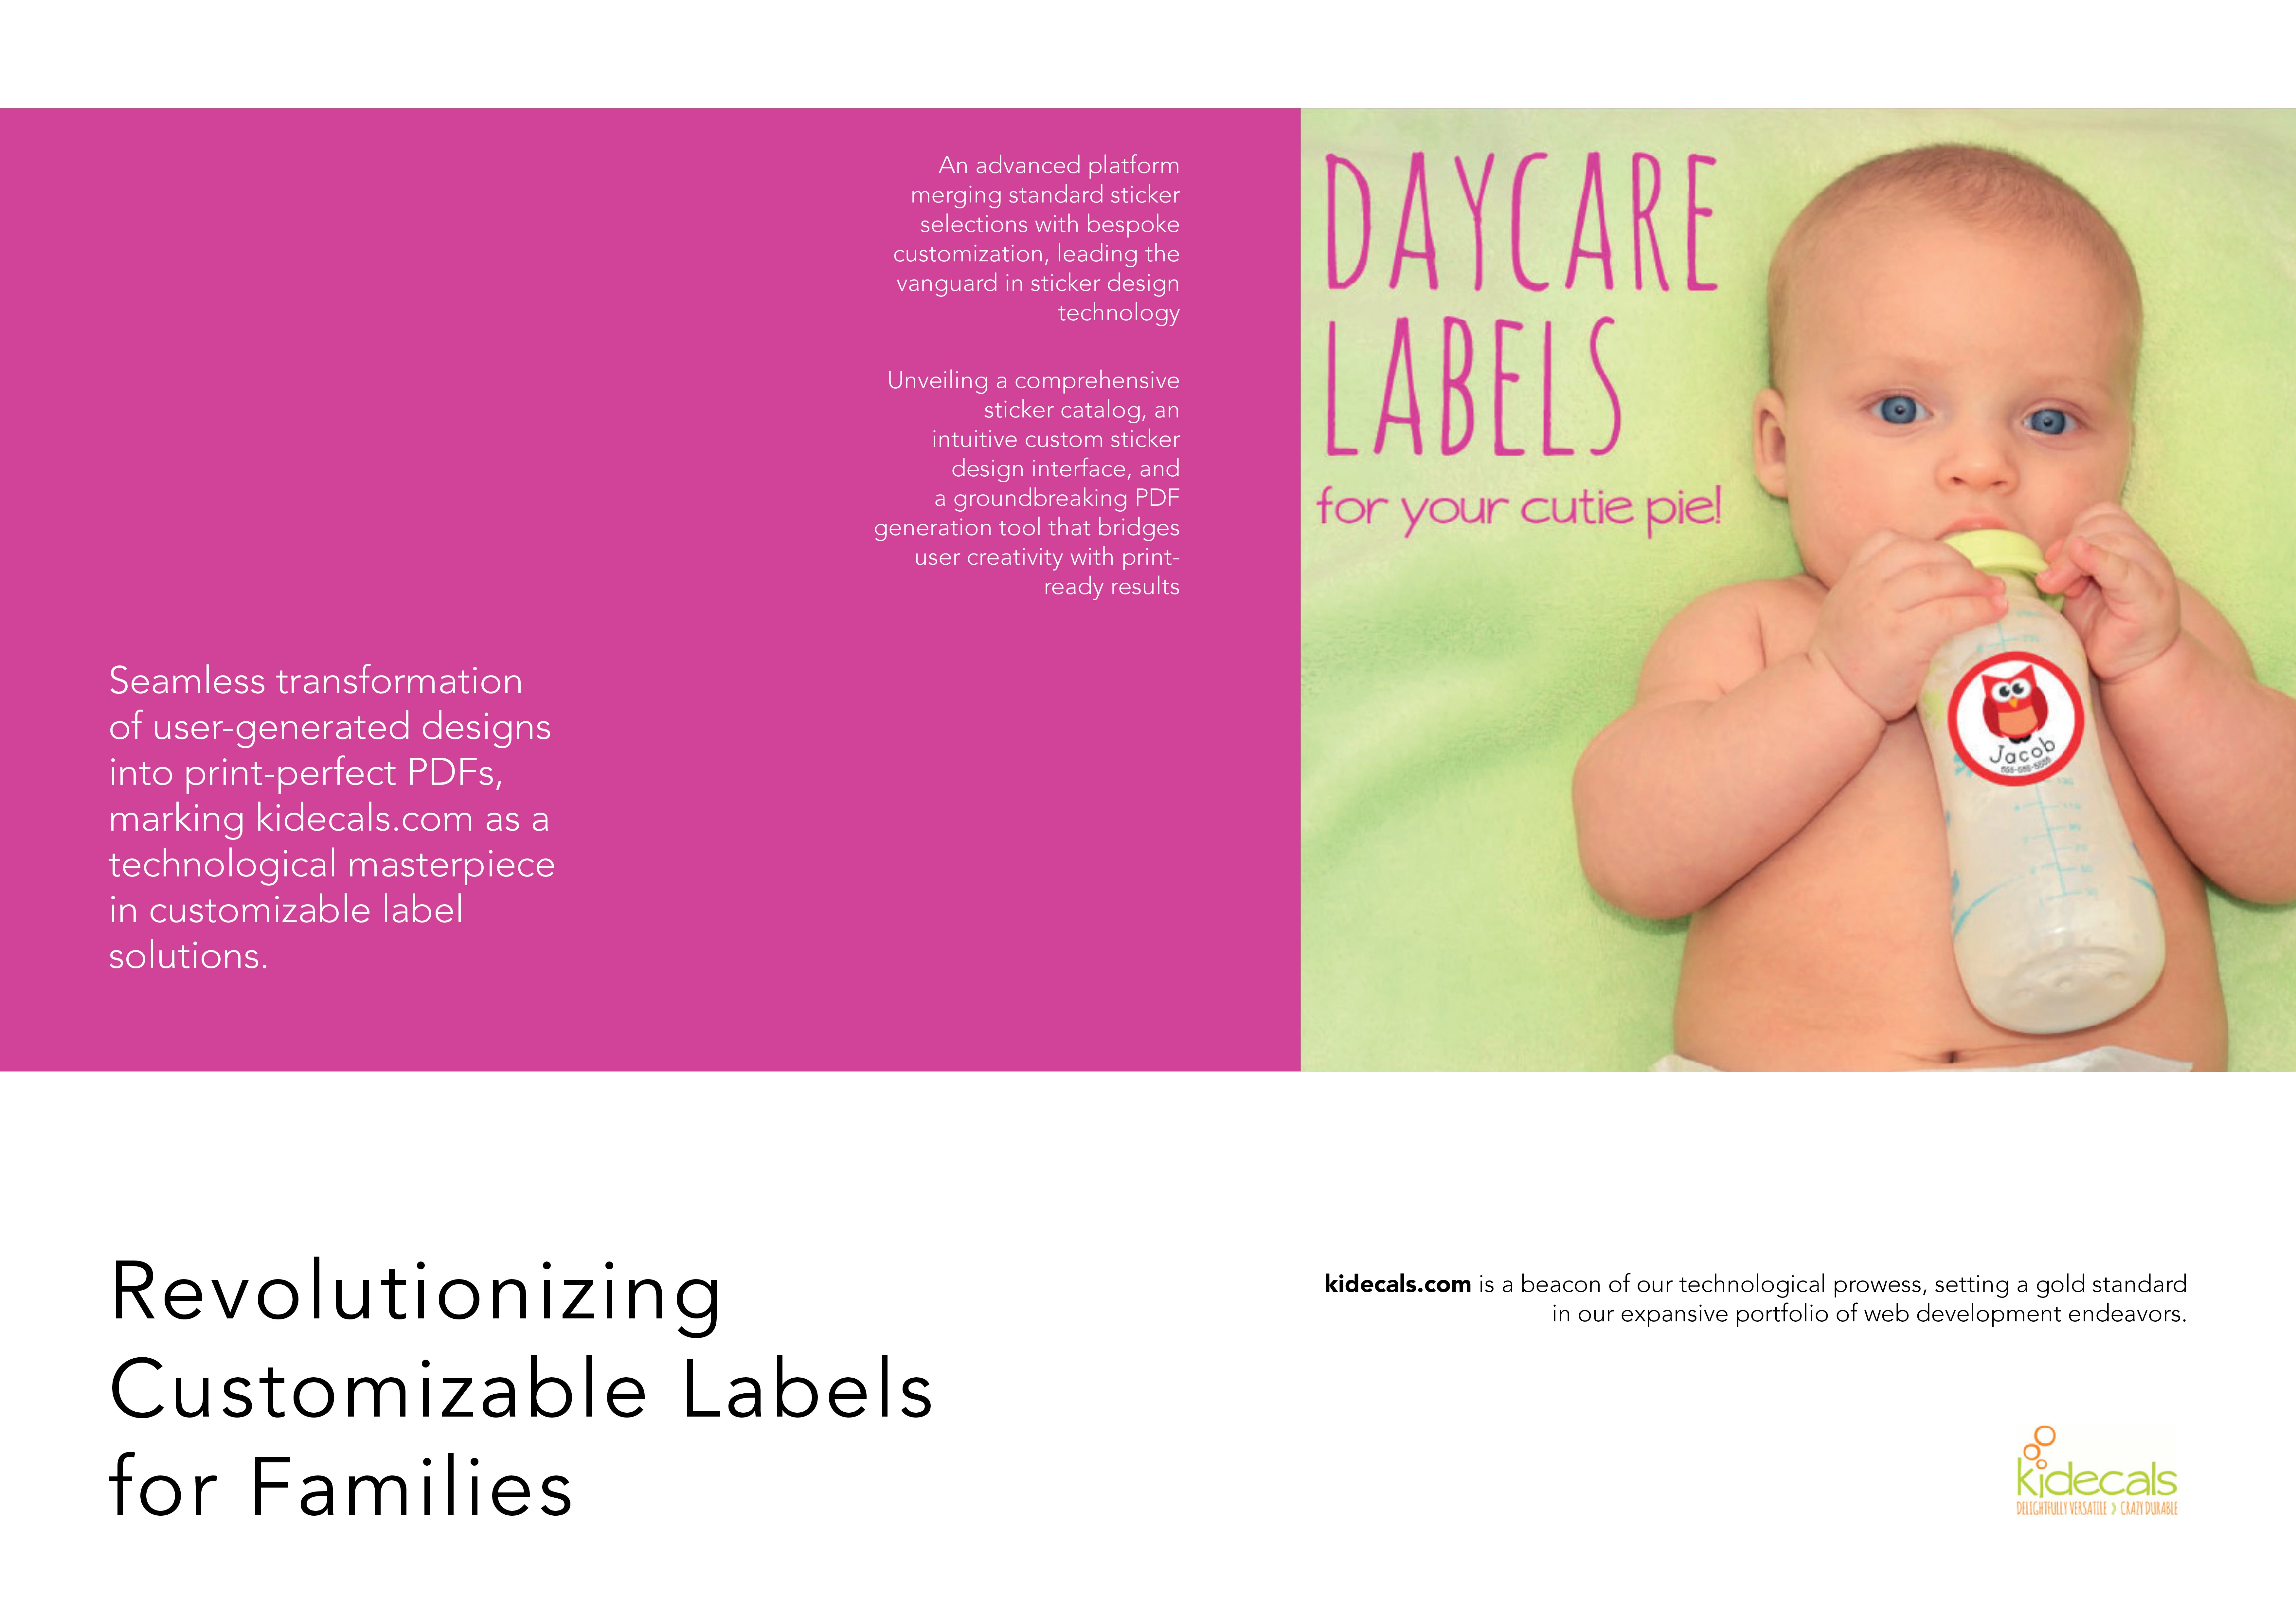 Revolutionizing Customizable Labels for Families